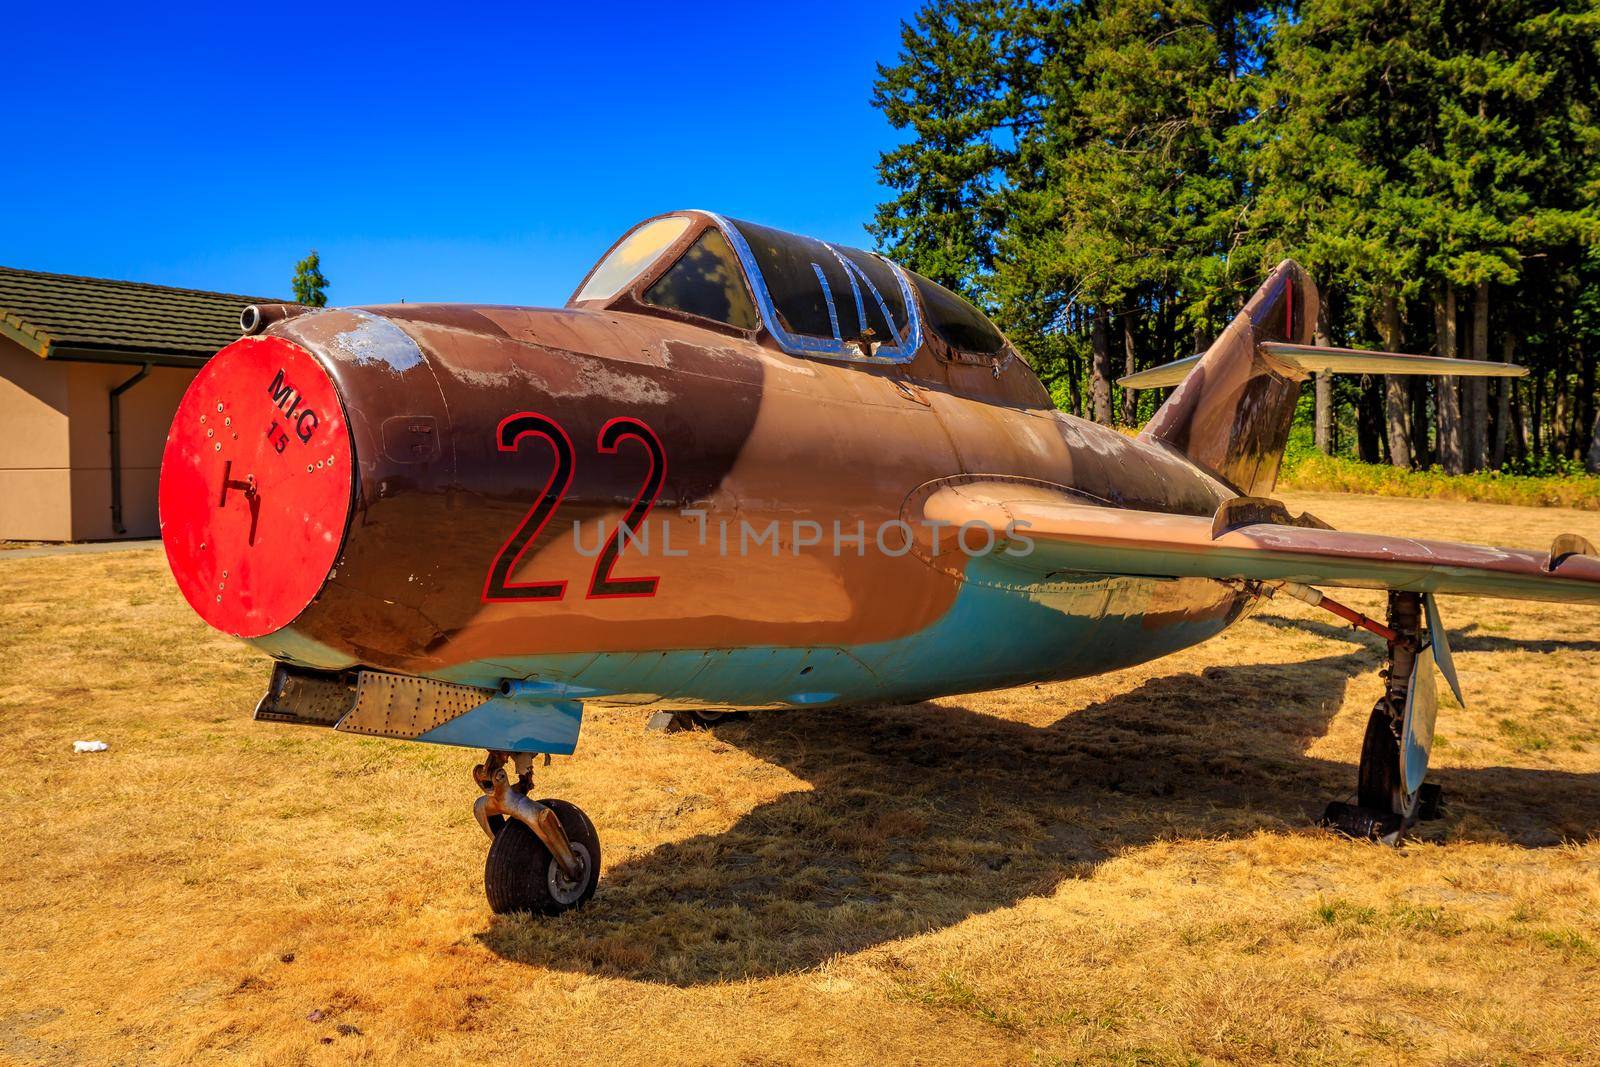 McMinnville, Oregon - August 21, 2017: Mikoyan-Gurevich MiG-15UTI 'Midget' (Shenyang JJ-2) '22 Black' on exhibition at Evergreen Aviation & Space Museum.